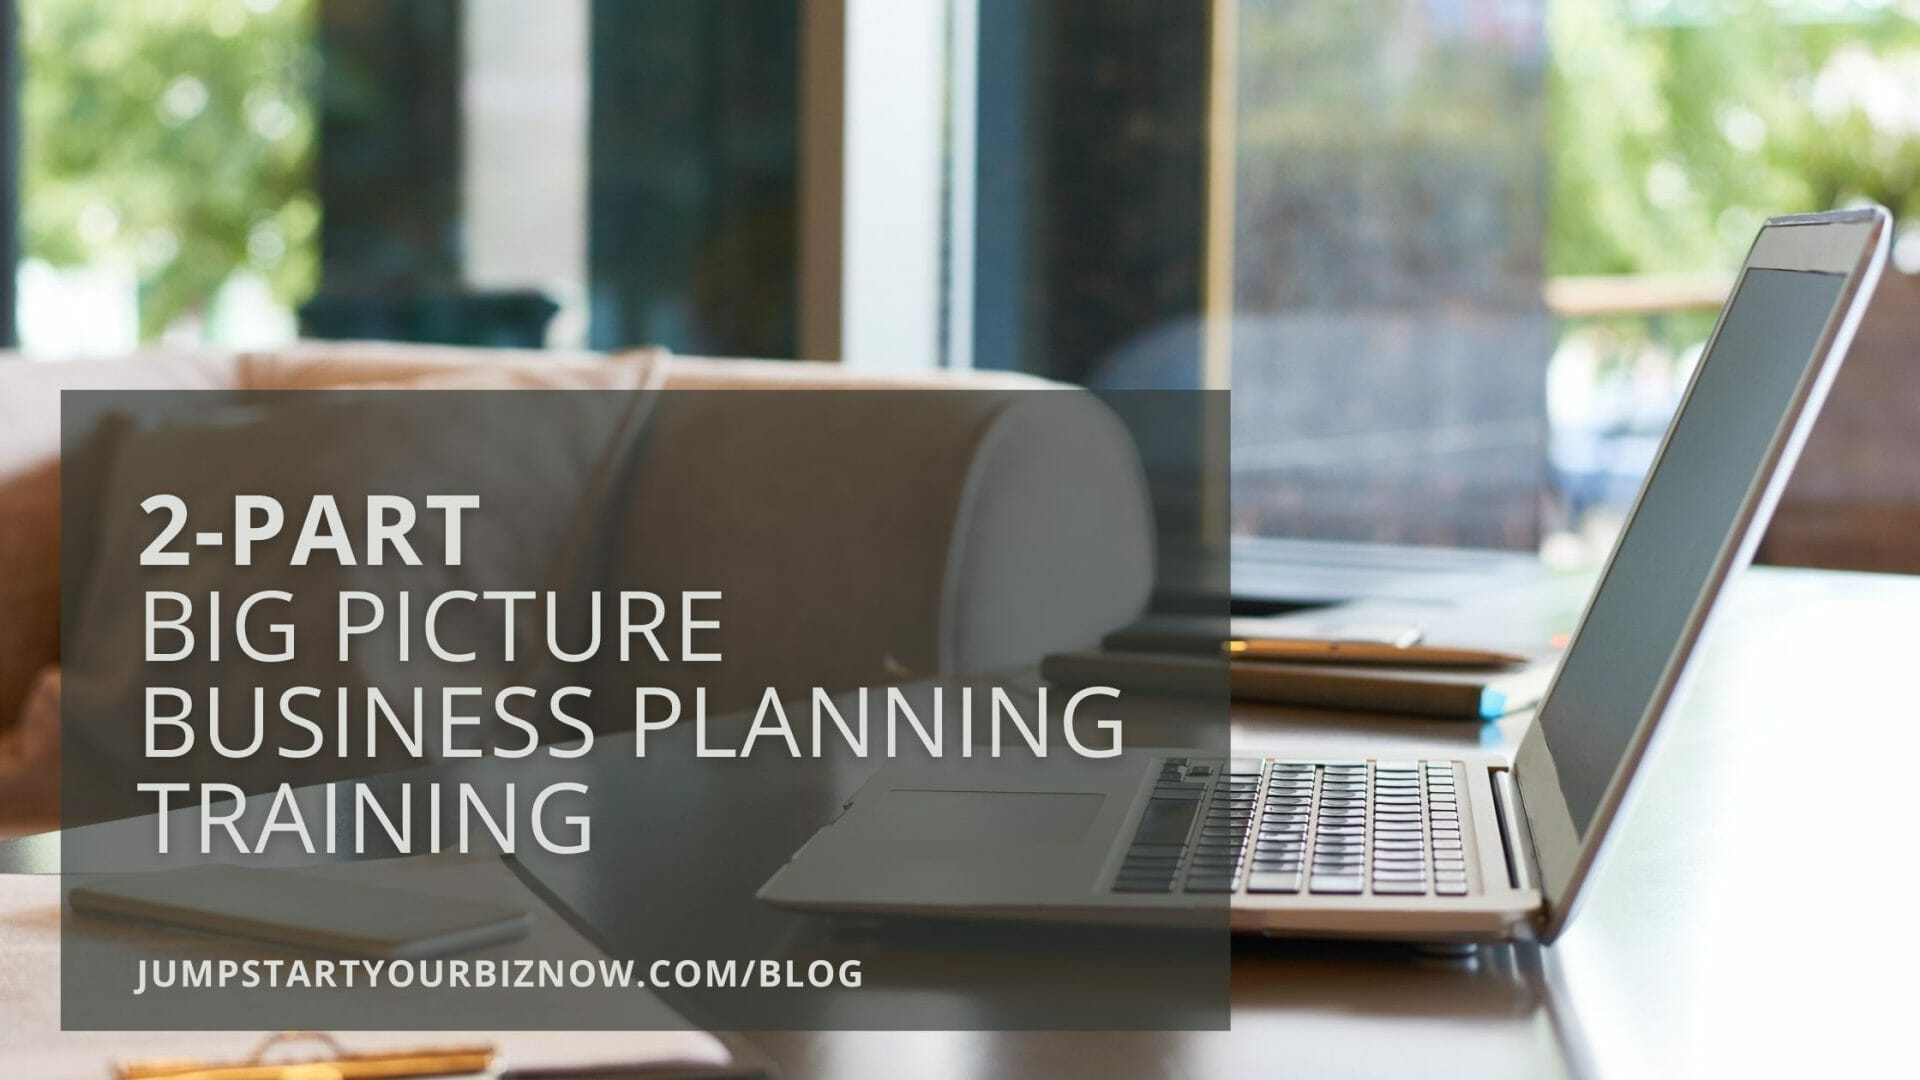 Big Picture Business Planning Training - 2 Parts